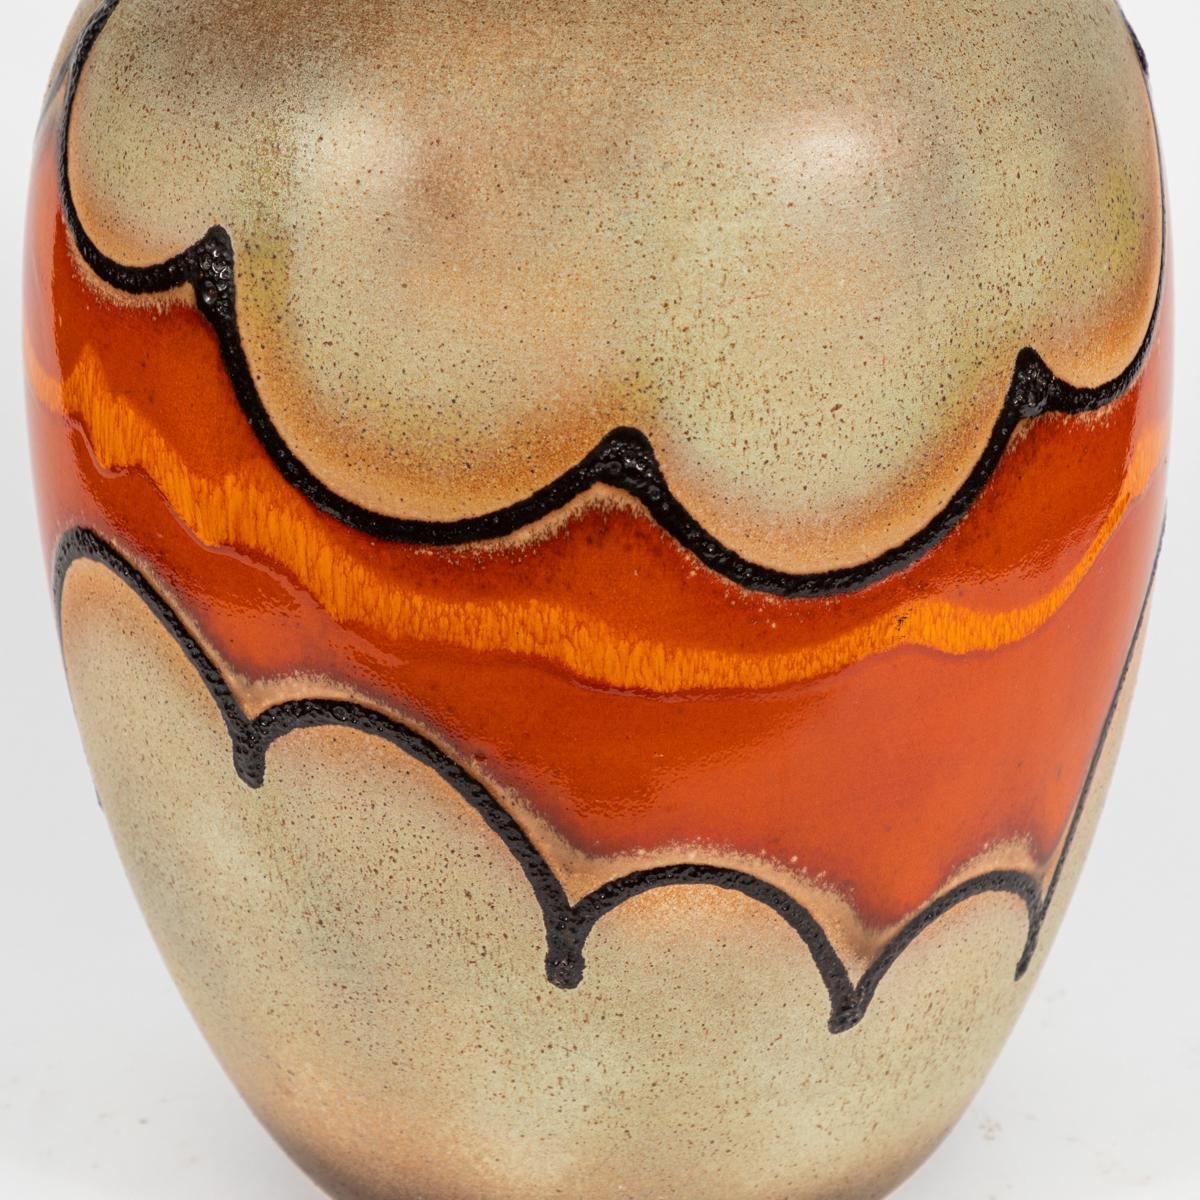 1960s mid-century glazed vase with orange red accent from Germany.